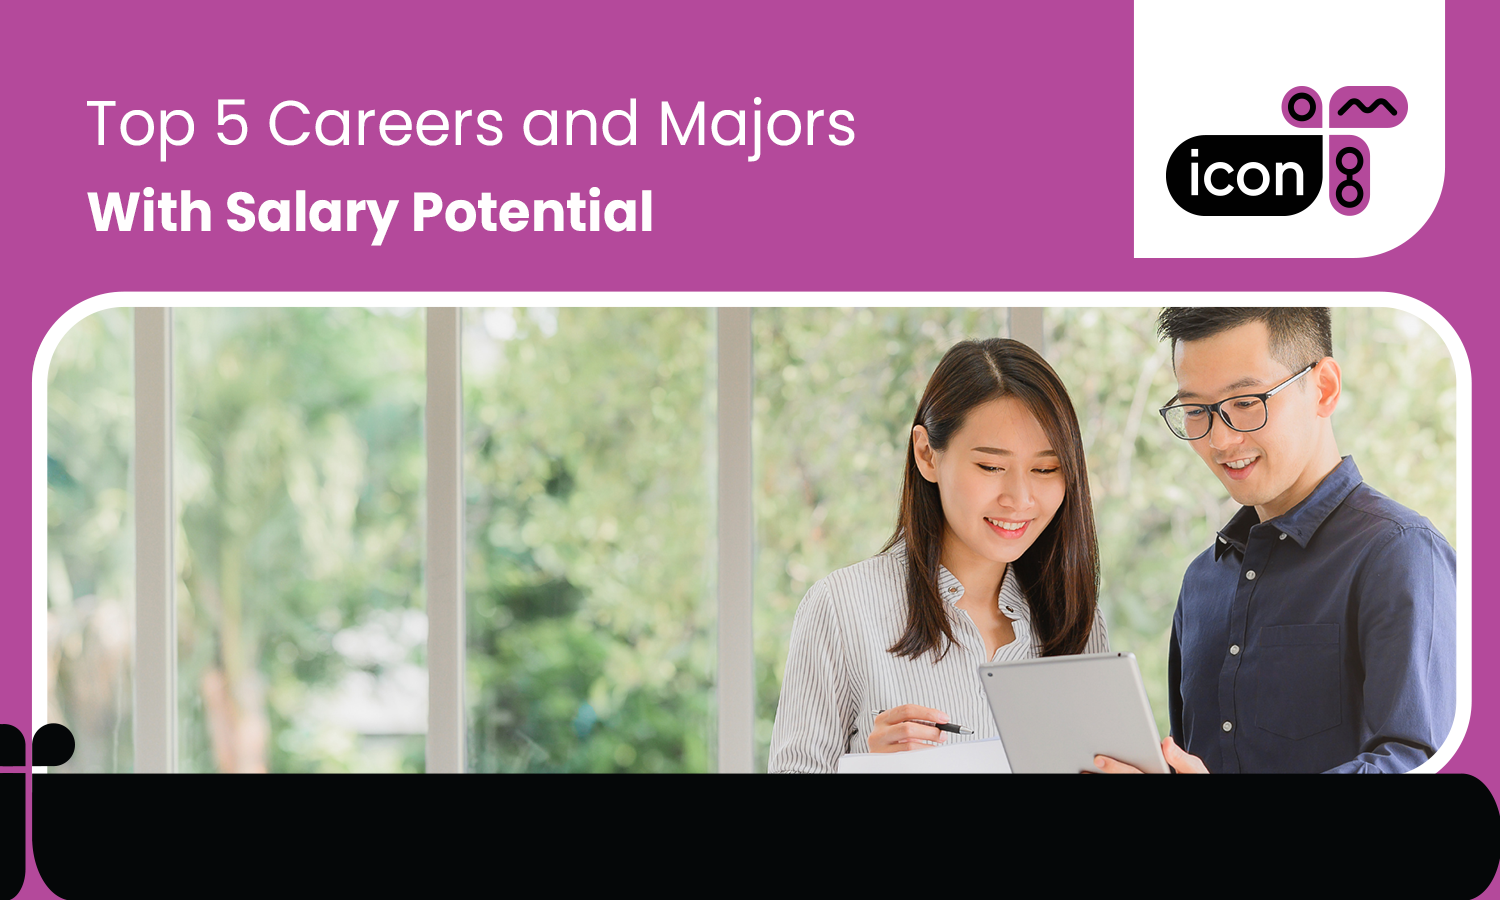 Top 5 Careers and Majors with Salary Potential in Singapore